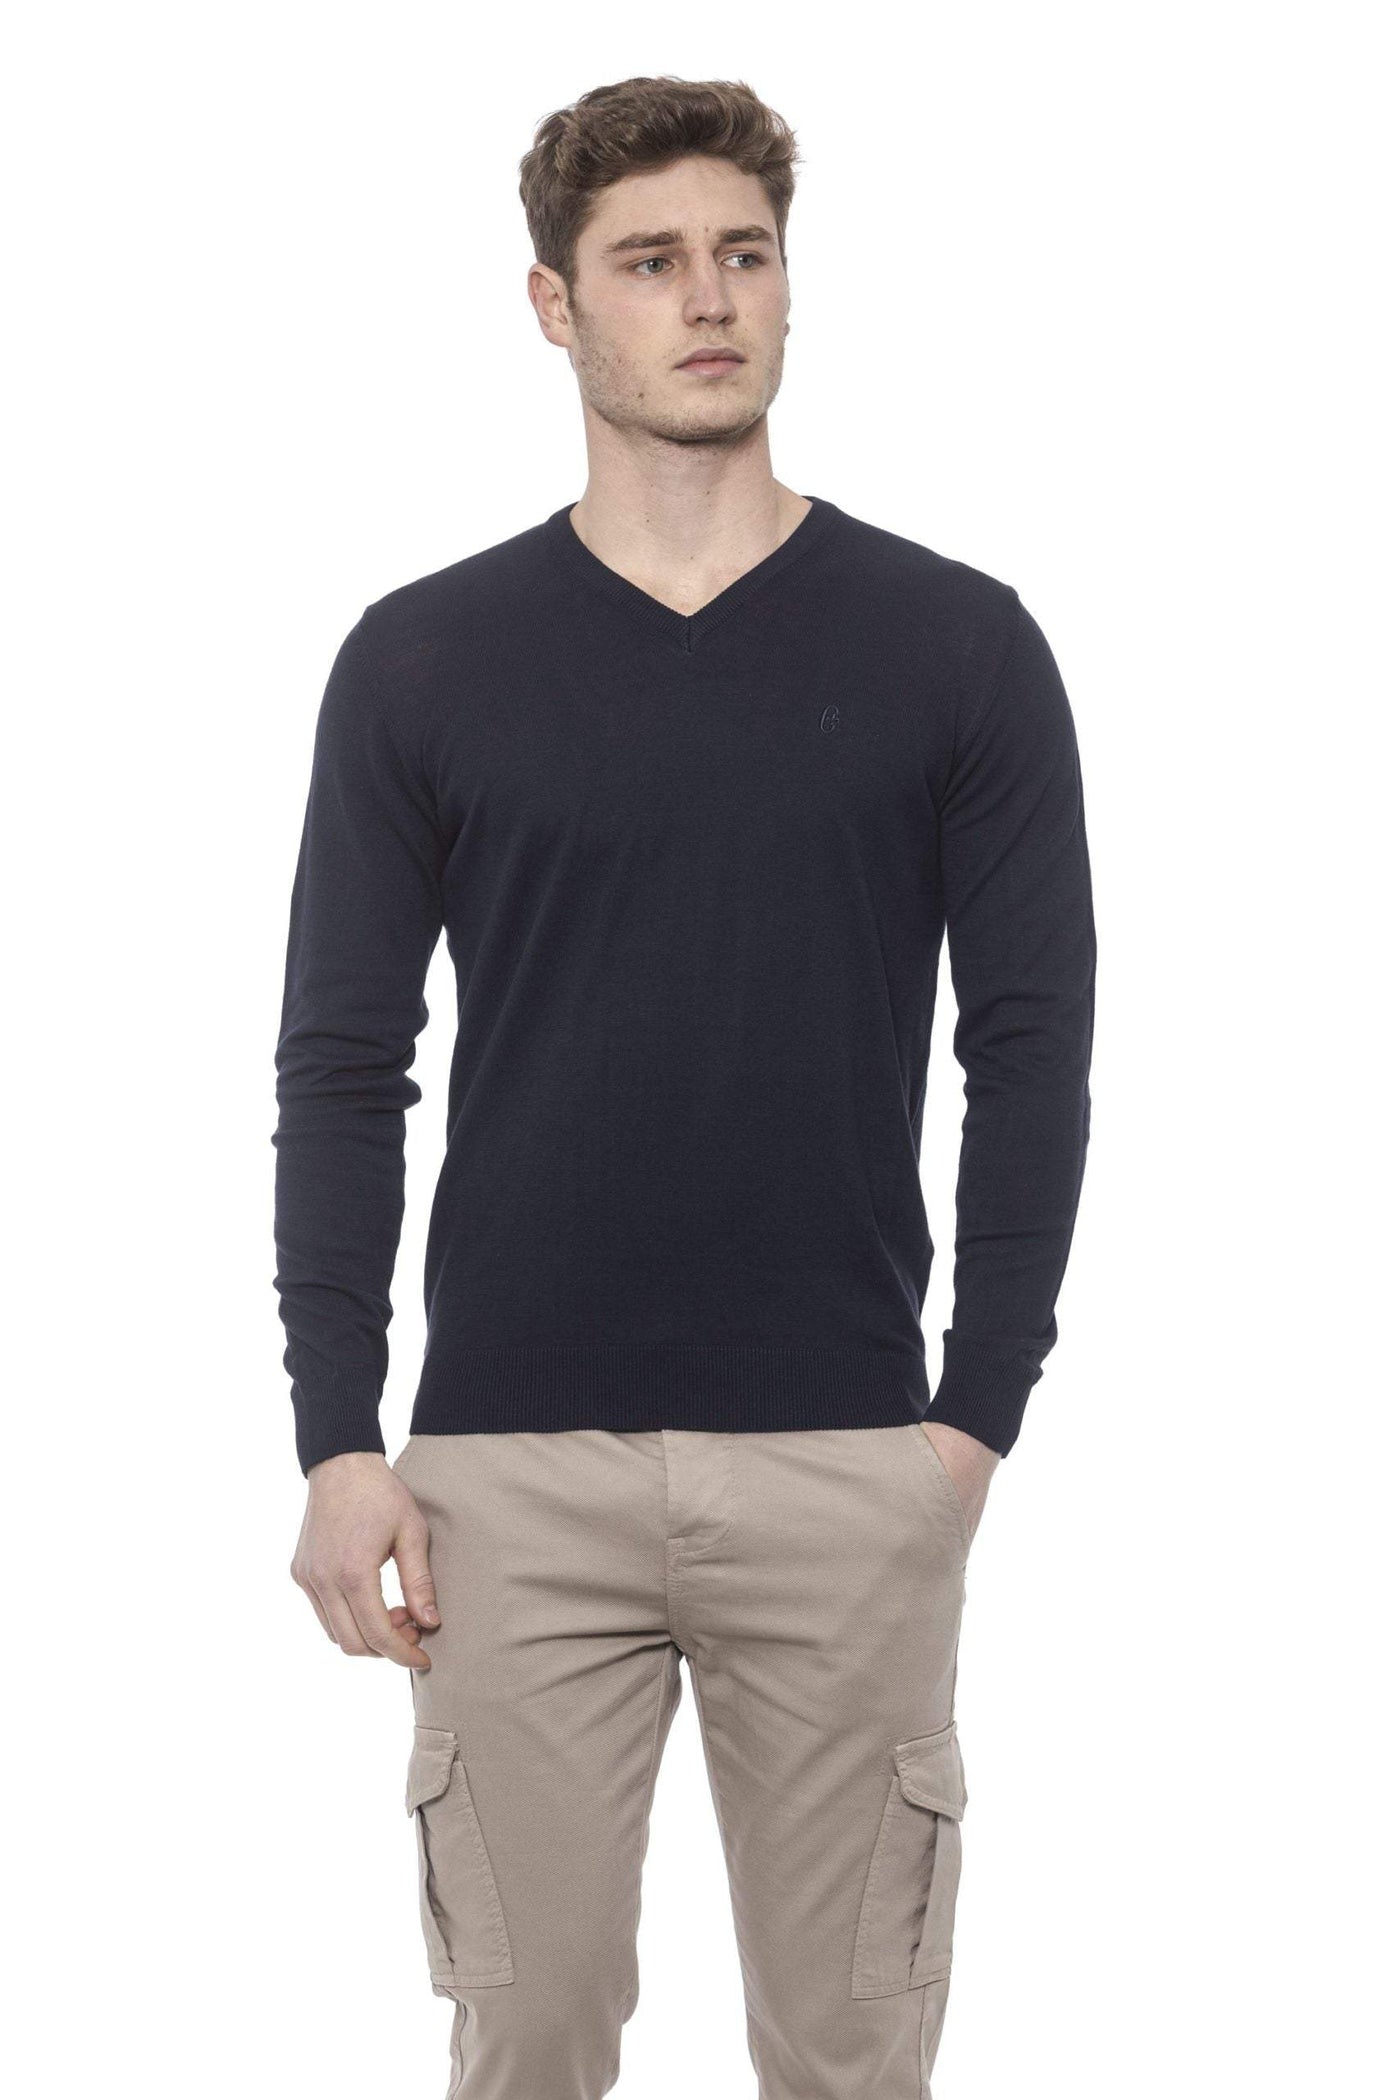 Conte of Florence v-neck  solid color  Sweater #men, 3XL, Blue, Conte of Florence, feed-agegroup-adult, feed-color-Blue, feed-gender-male, L, M, S, Sweaters - Men - Clothing, XL, XXL at SEYMAYKA